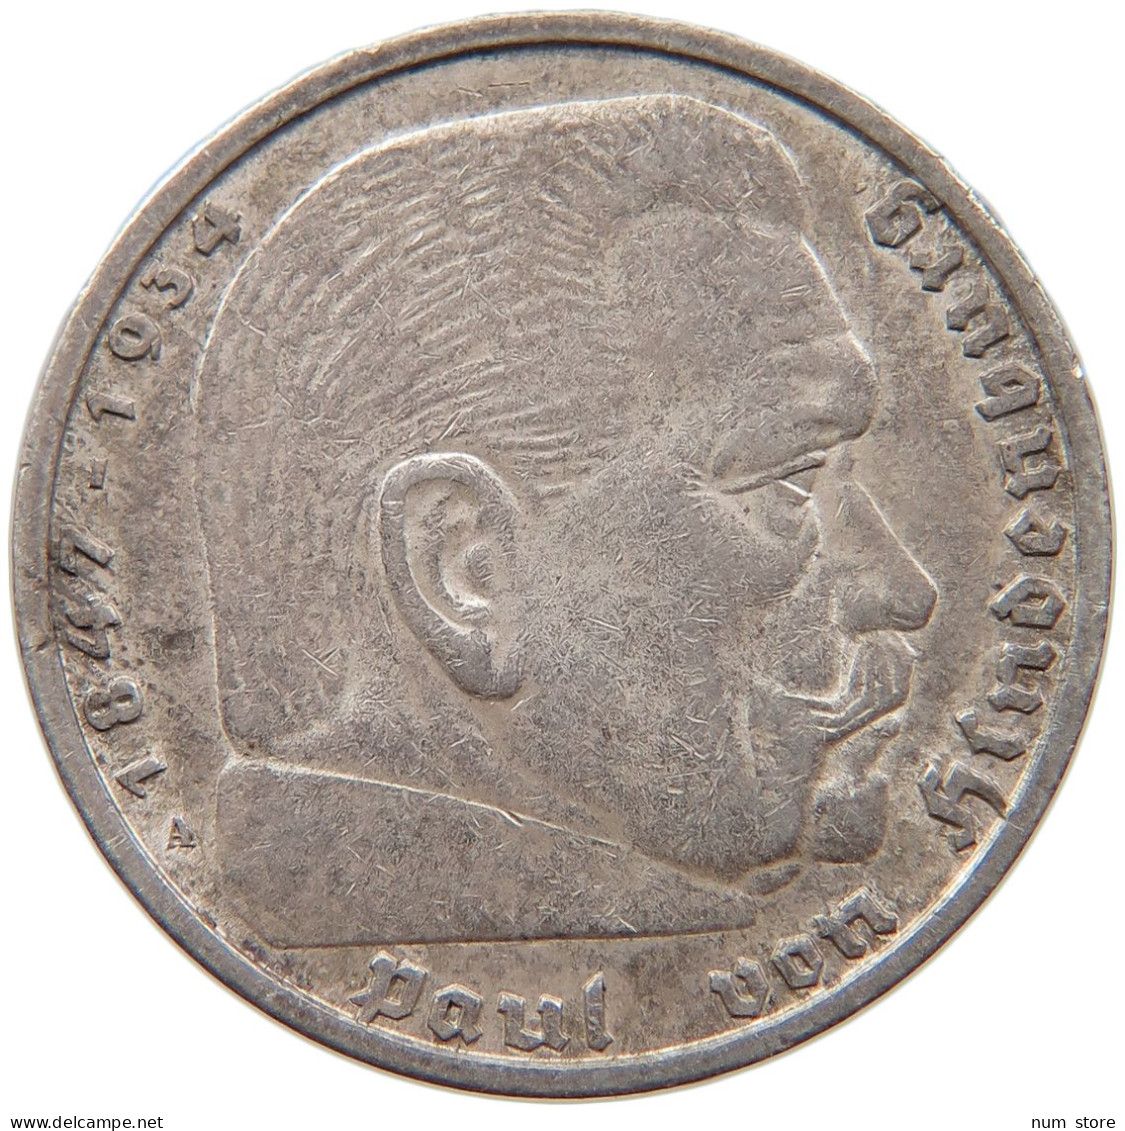 GERMANY 5 MARK 1936 A #s094 0067 - 5 Reichsmark